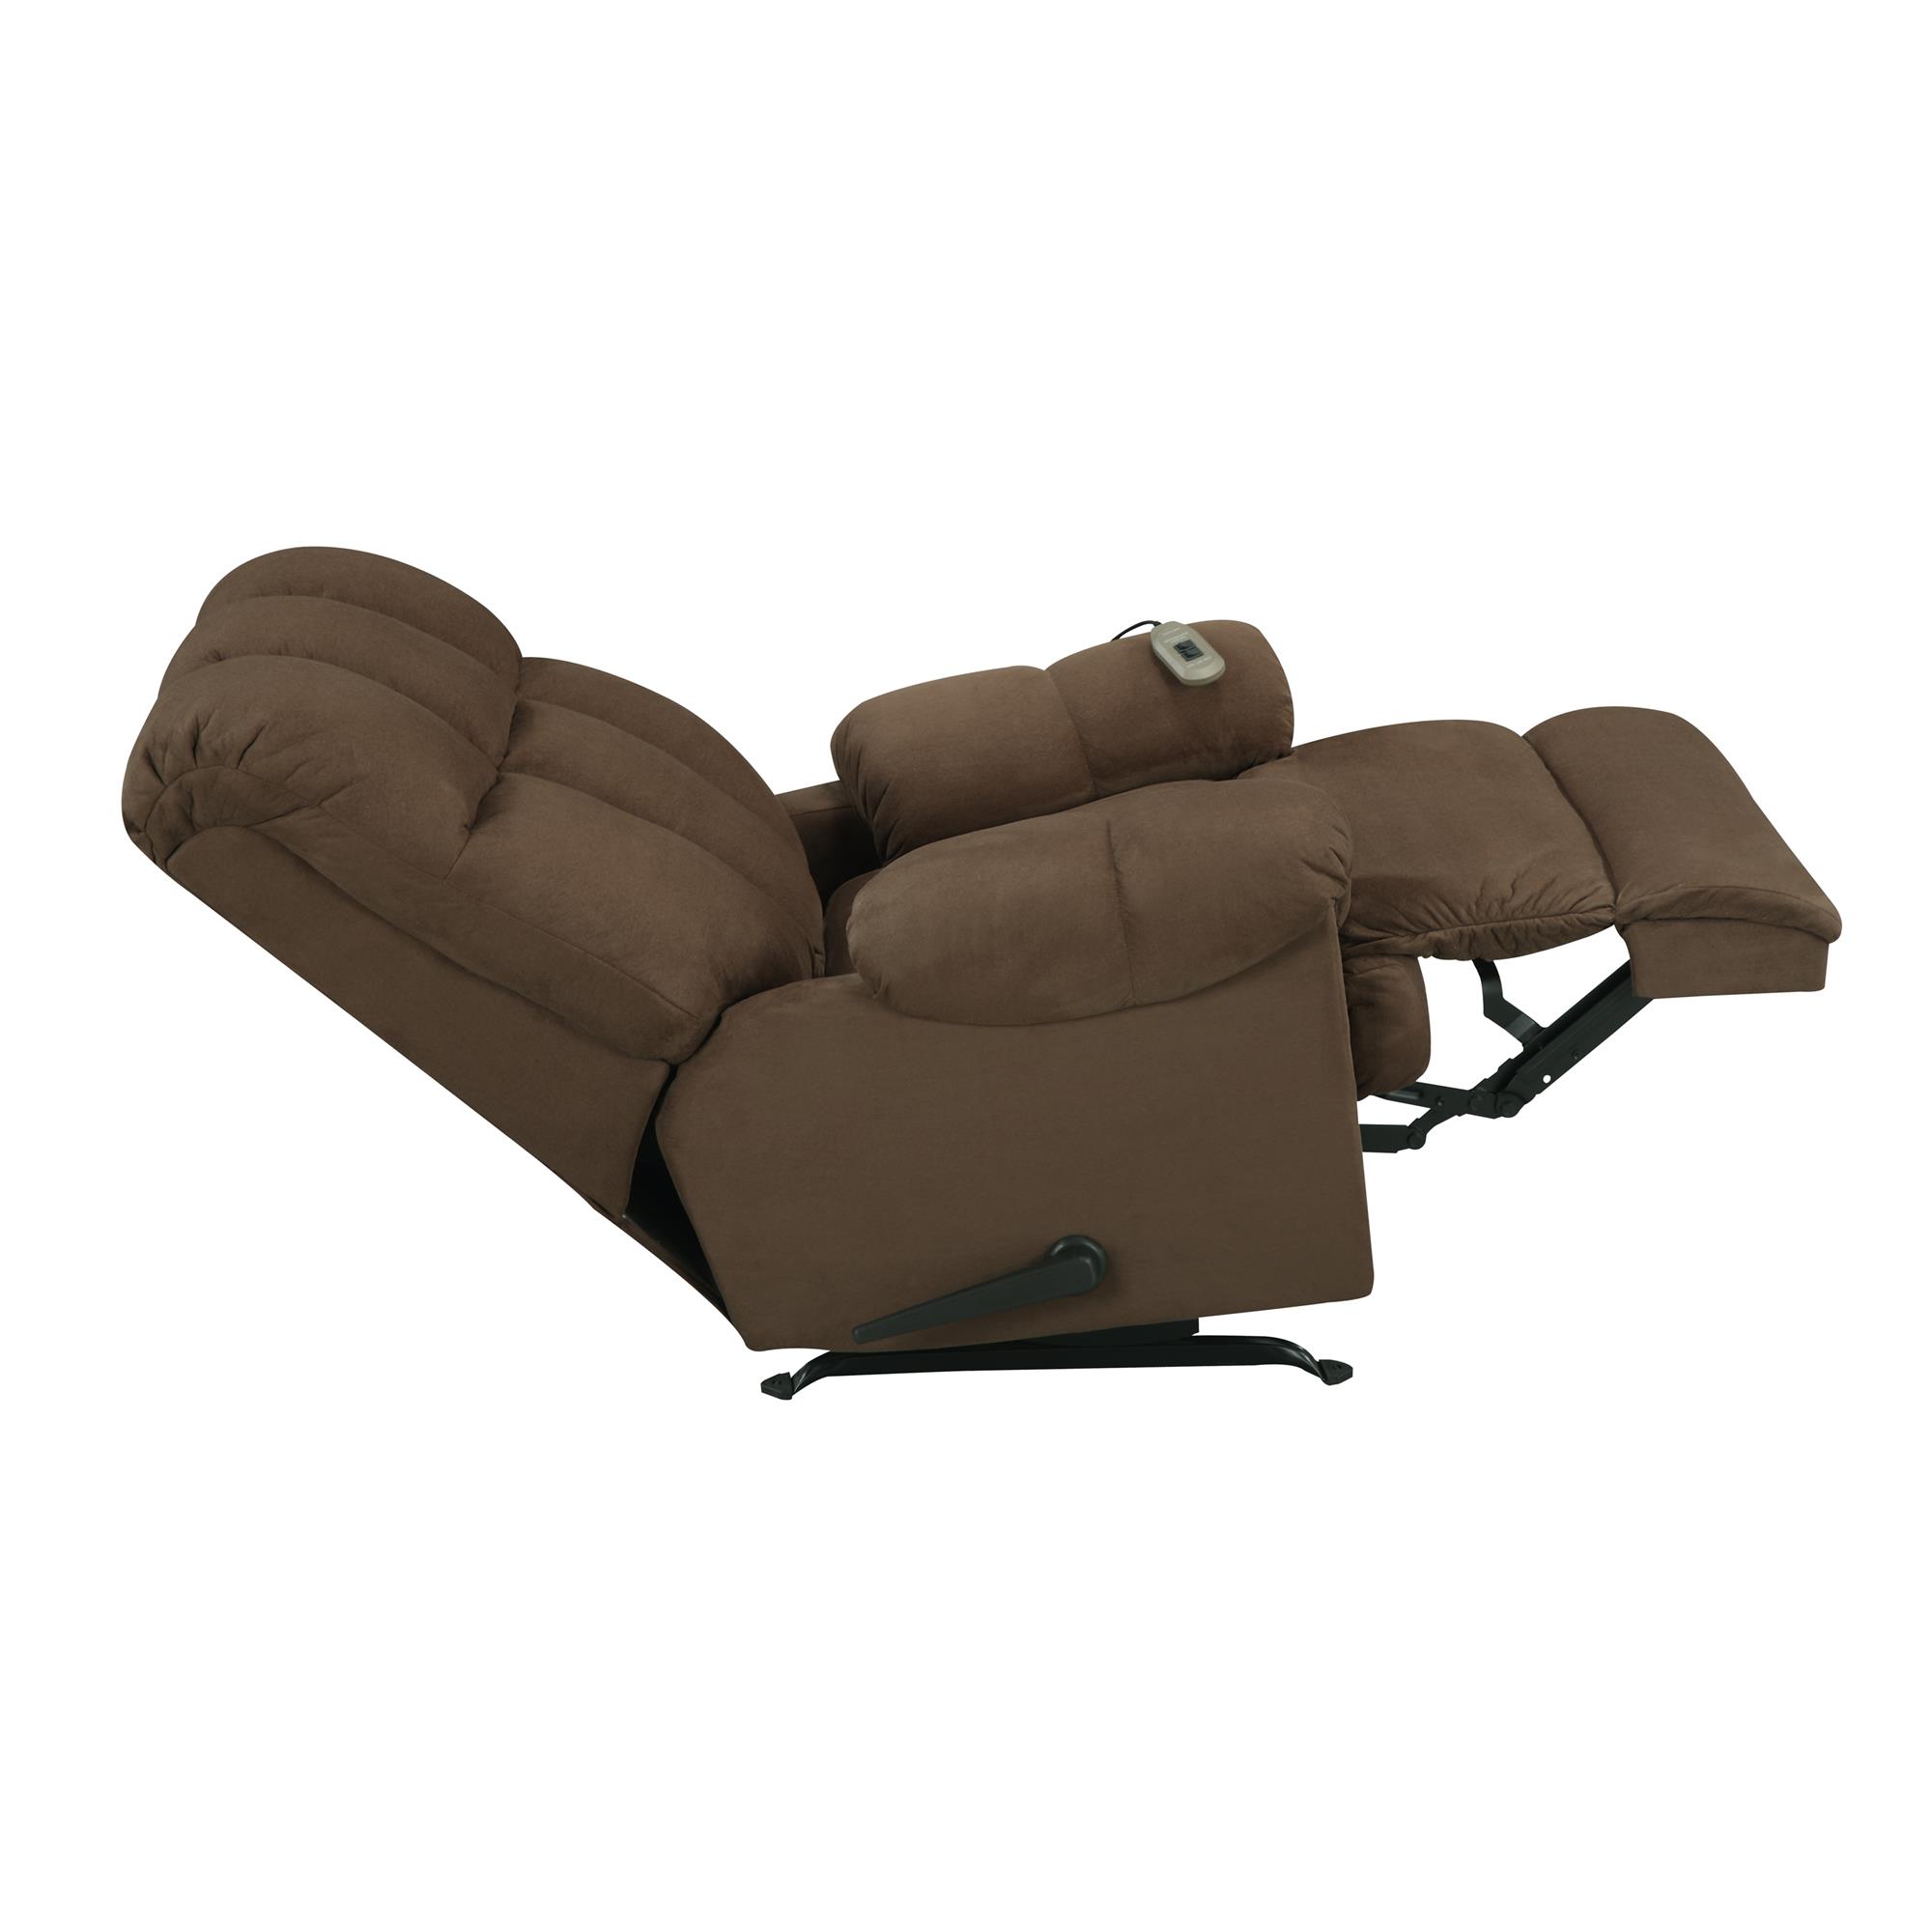 Elm & Oak Padded Massage Chair Recliner, Chocolate Upholstery - image 4 of 12